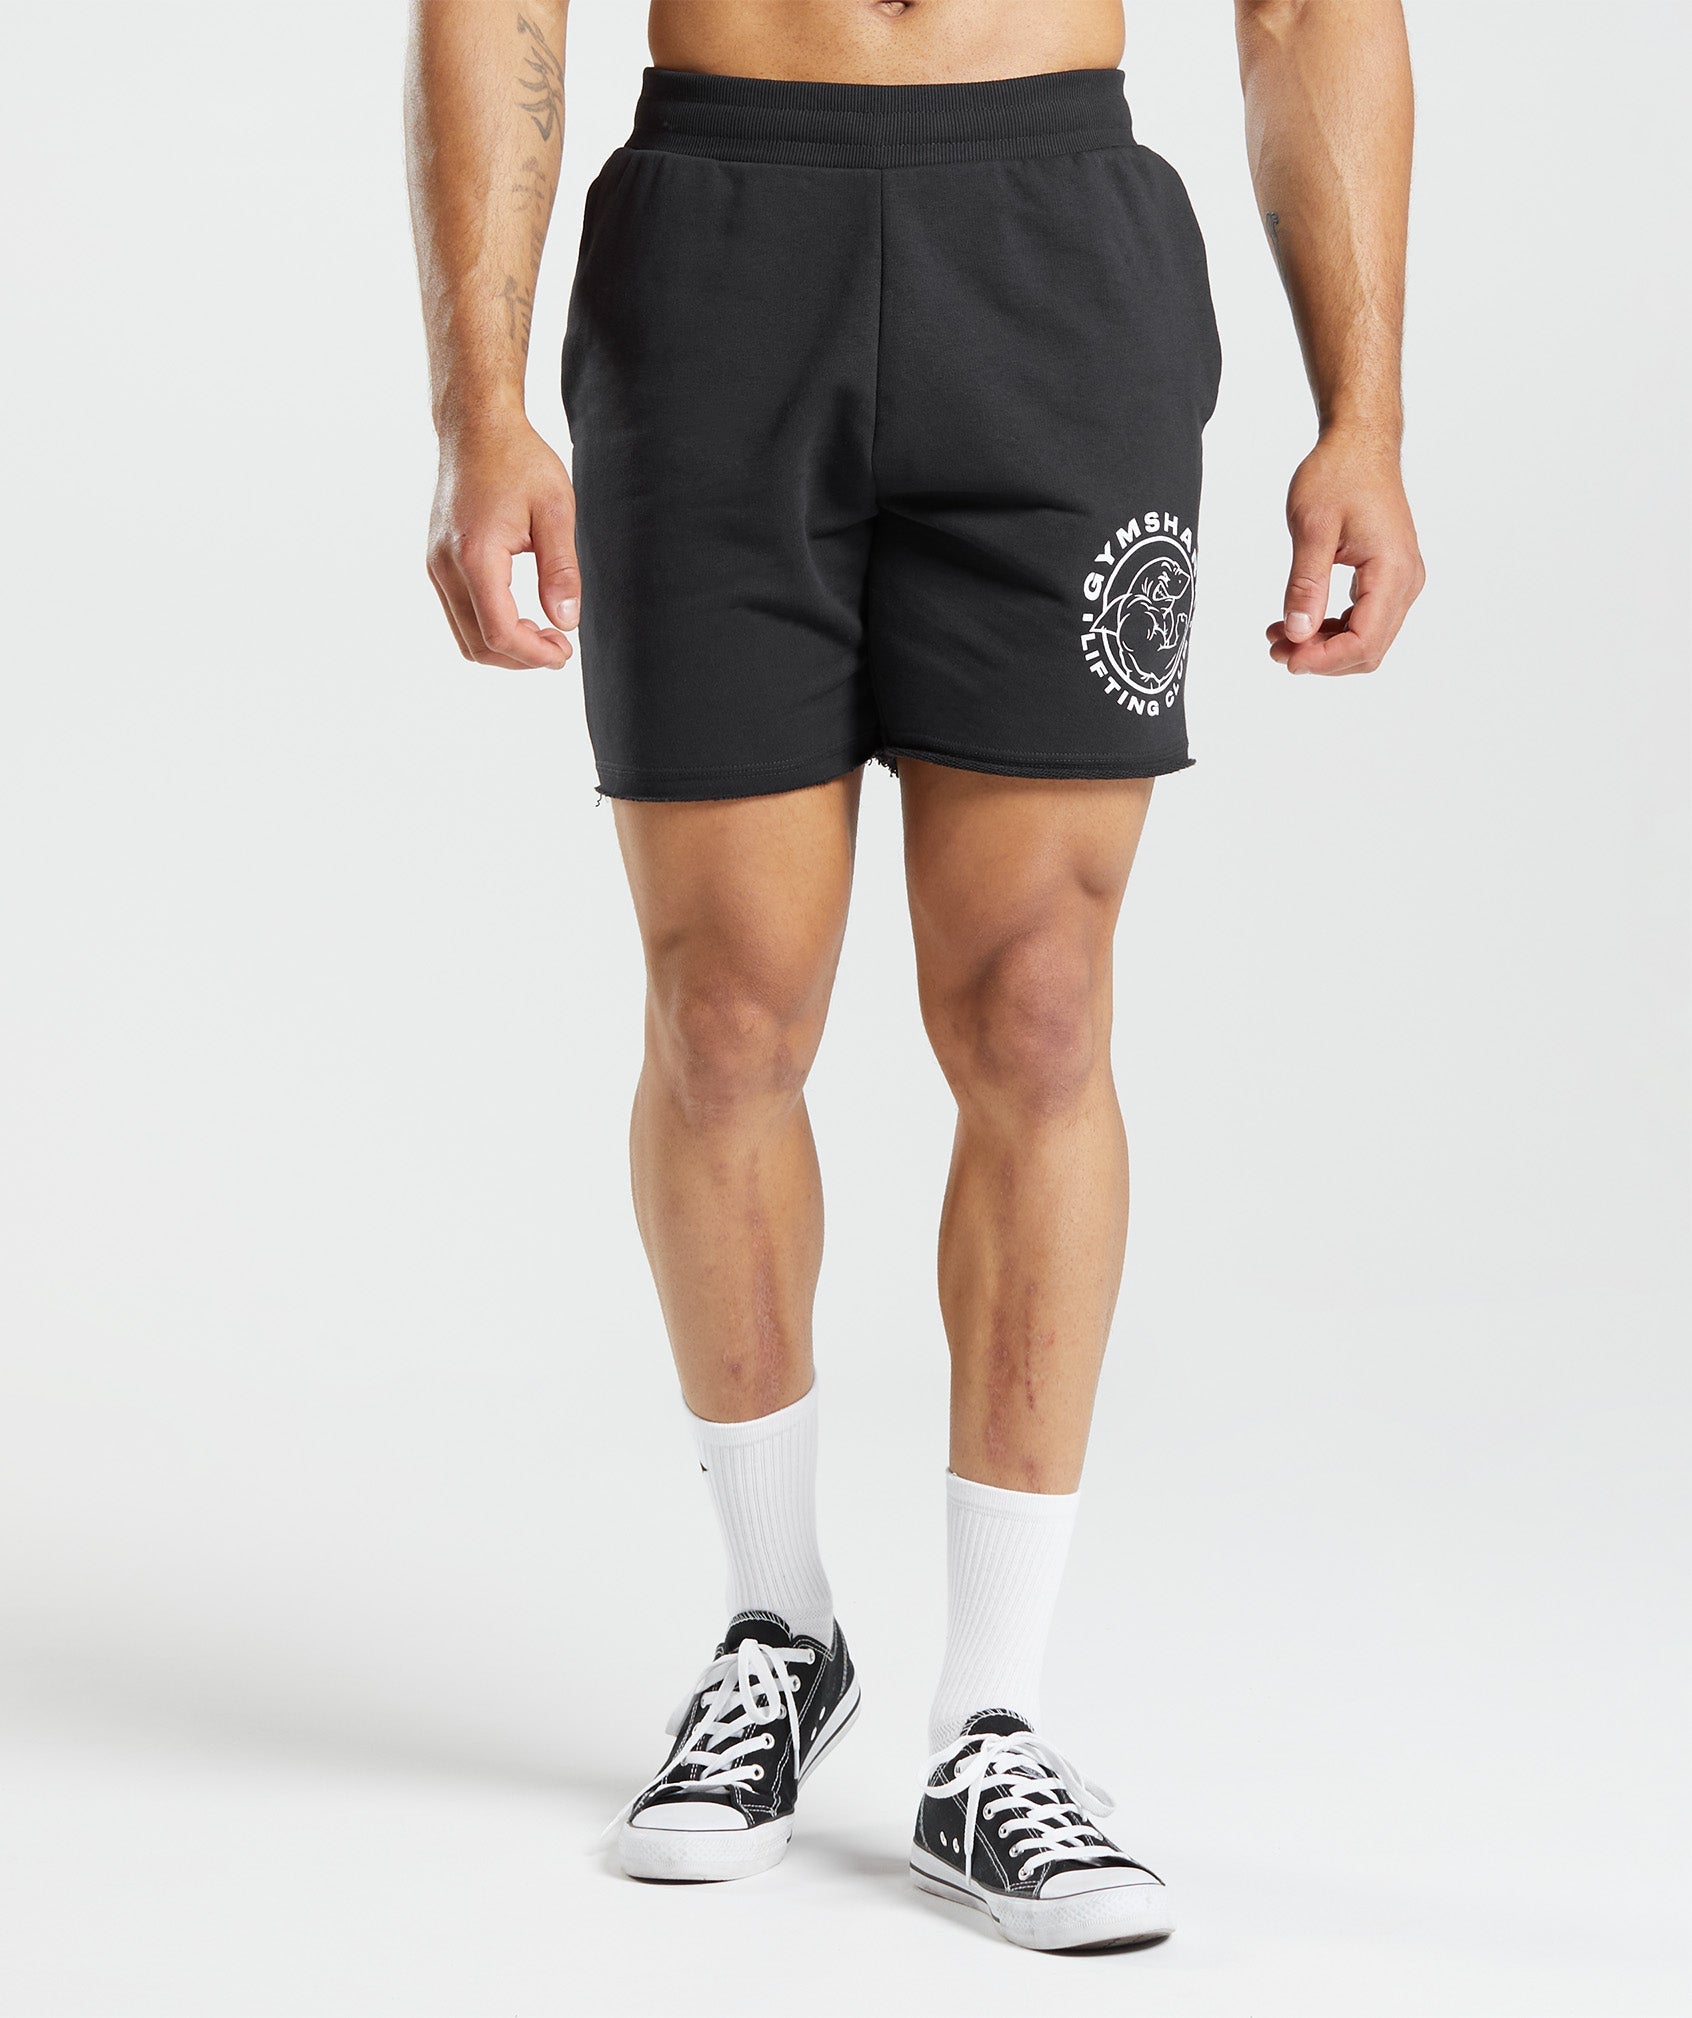 Gymshark Legacy Luxe Shorts Black Size M - $40 (81% Off Retail) - From Katie